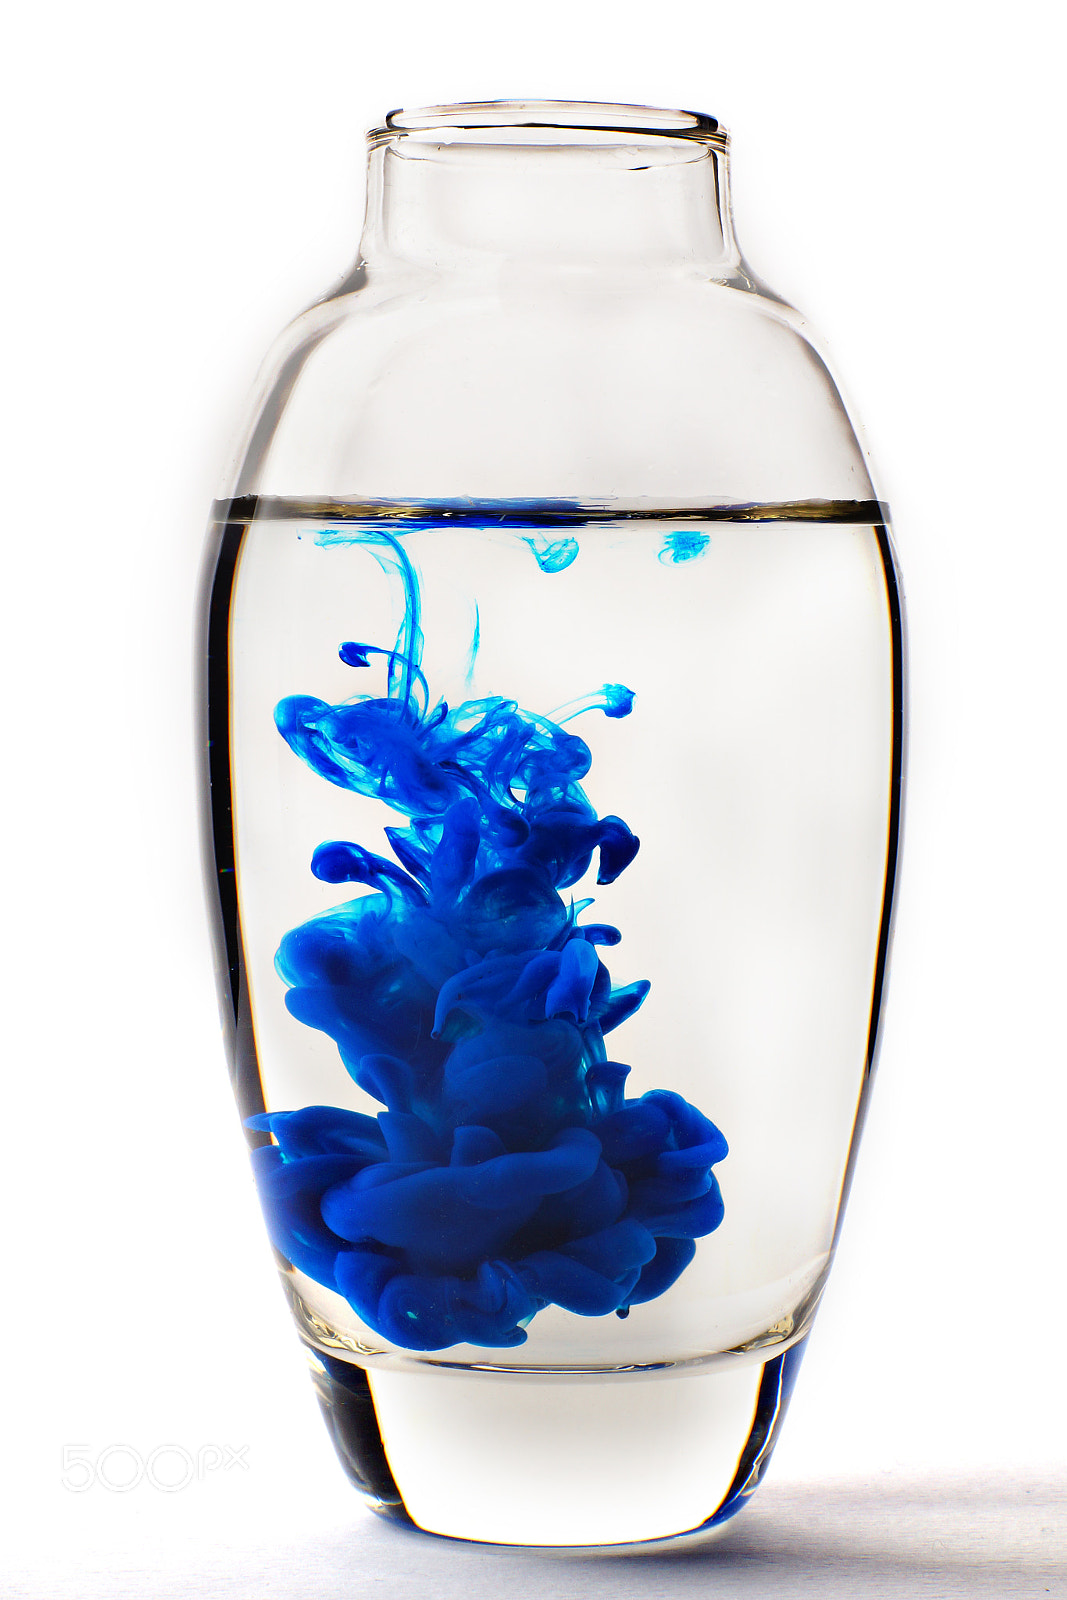 Sony SLT-A65 (SLT-A65V) sample photo. Glass vase with water on white background, inside spreads a drop of blue paint. photography